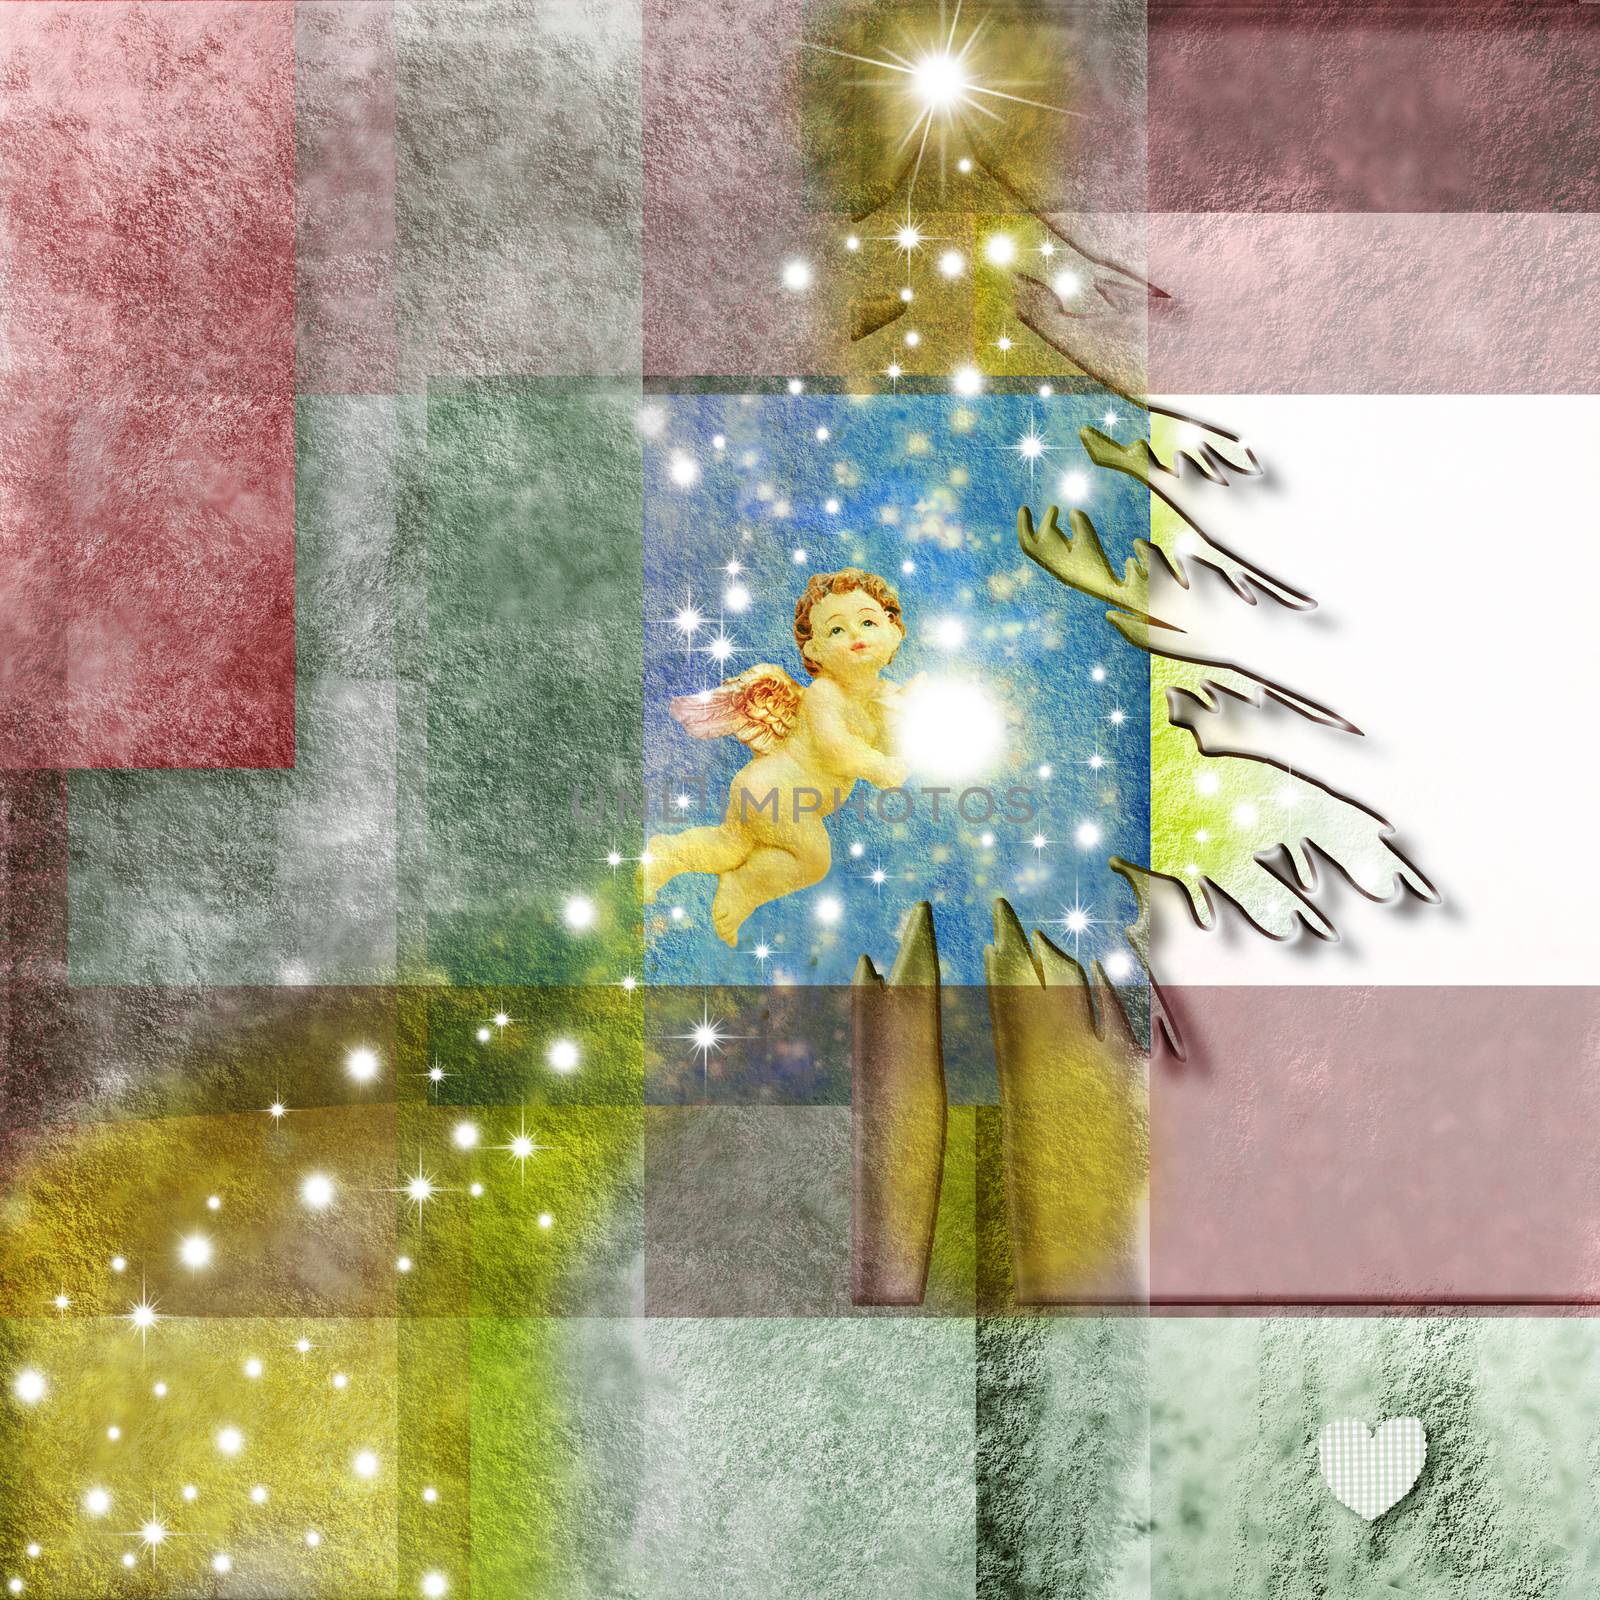  Christmas tree and angel by Carche